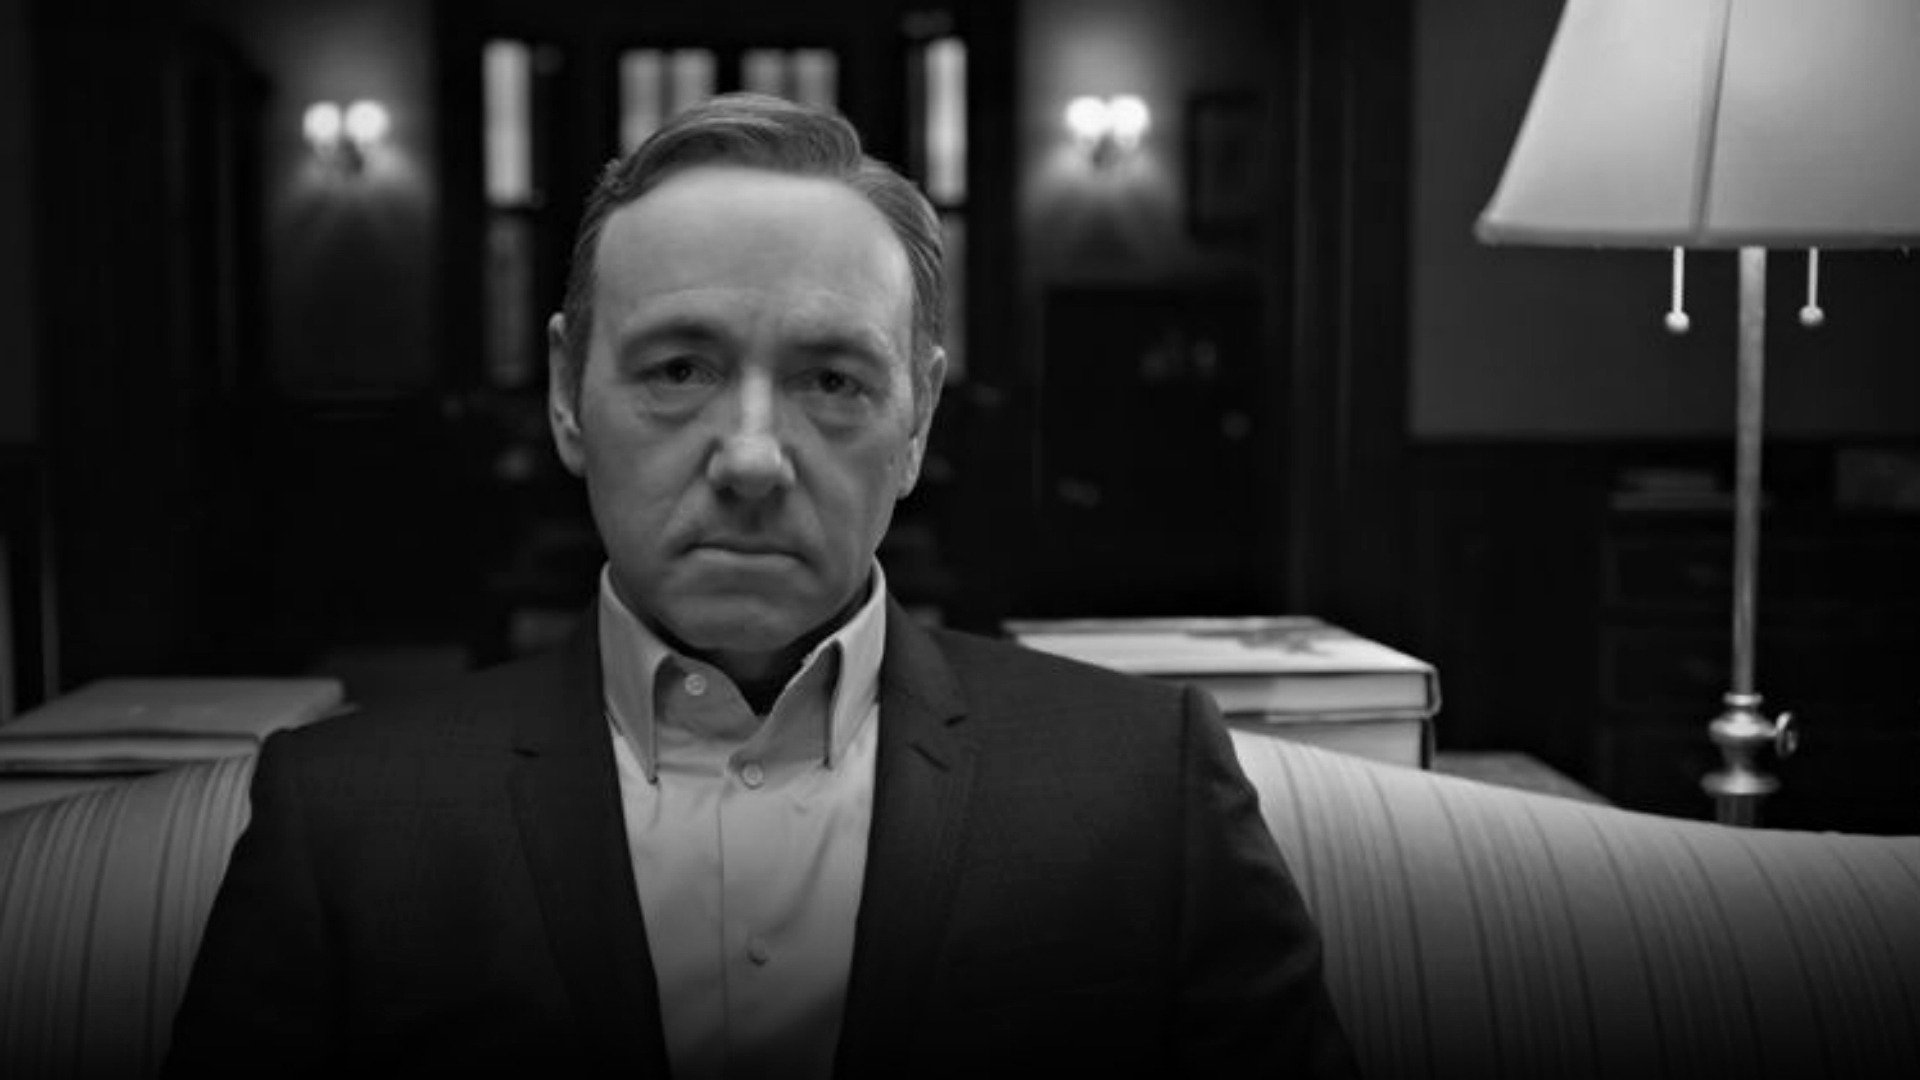 HOUSE OF CARDS political drama series 32 wallpaper background 1920x1080